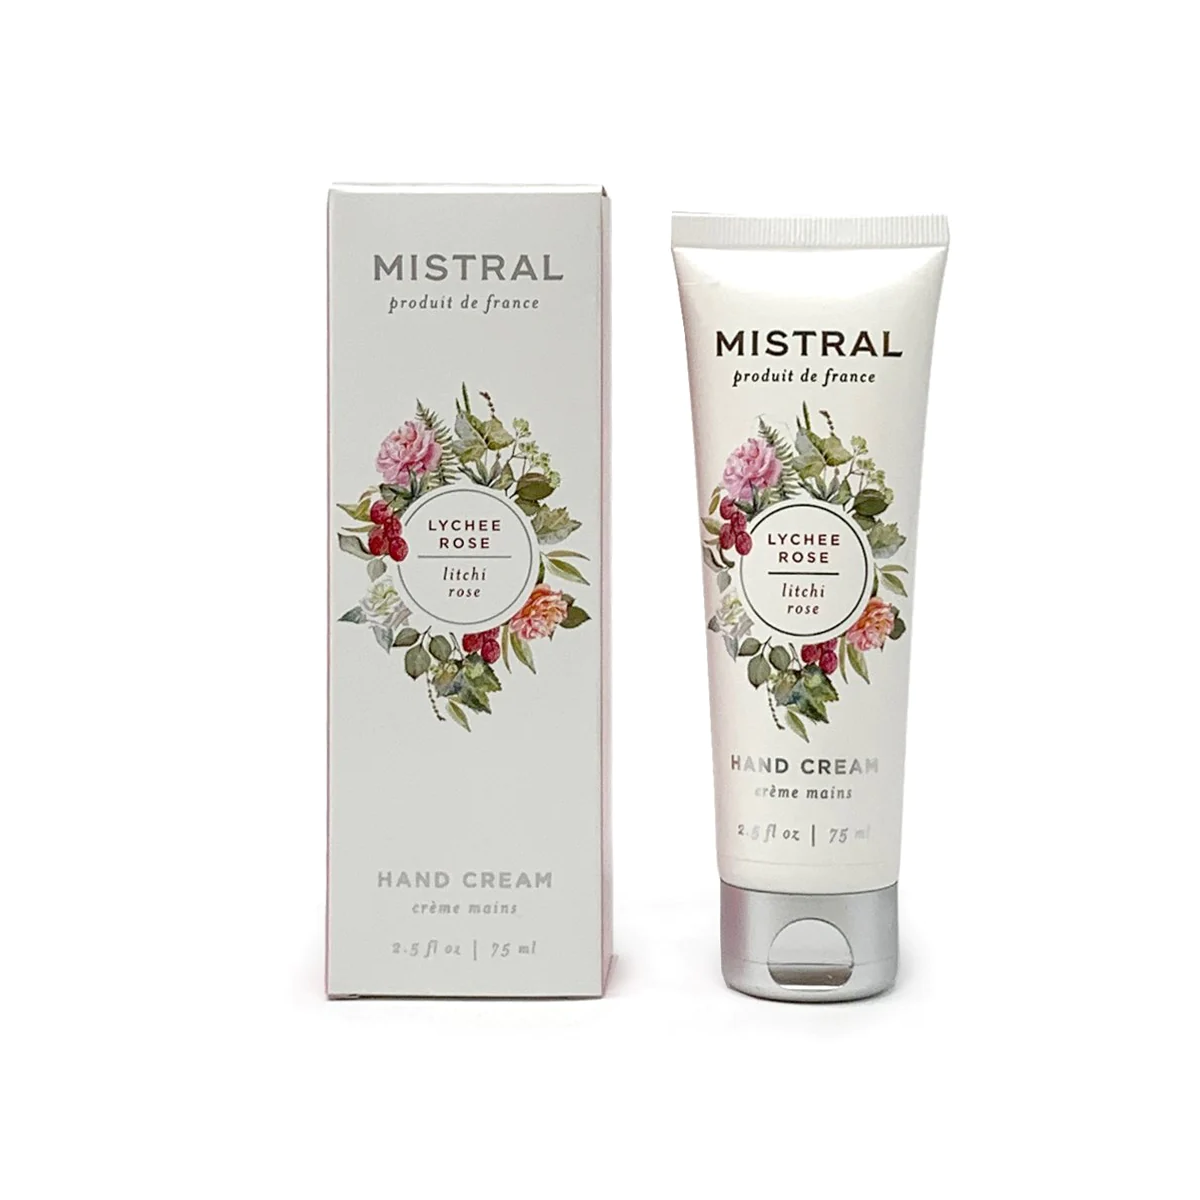 LYCHEE ROSE CLASSIC HAND CREAM by MISTRAL